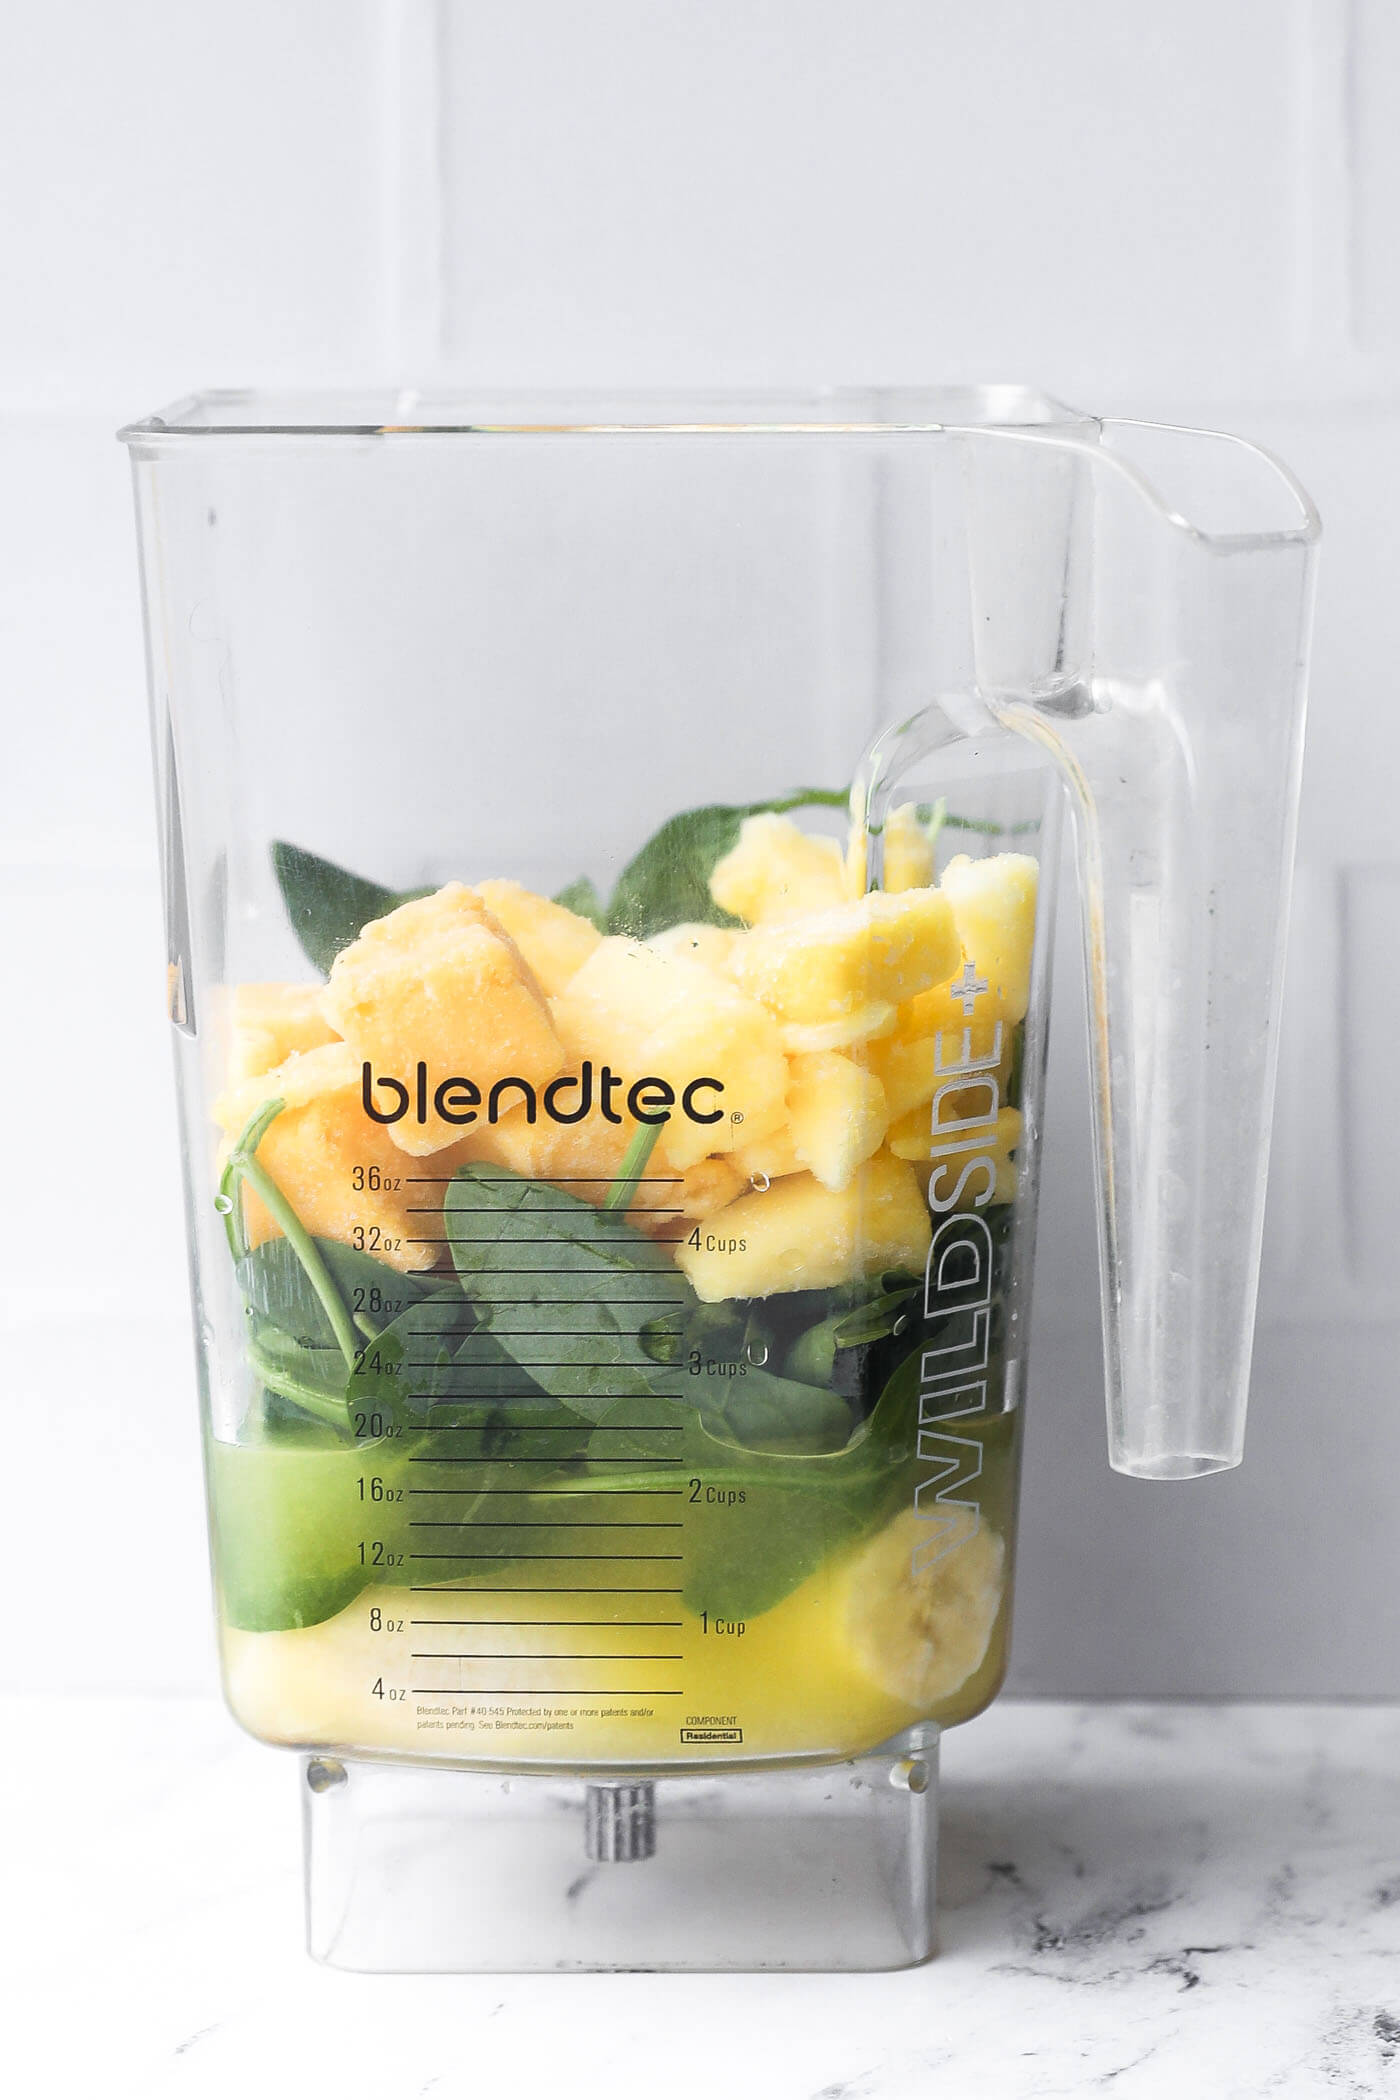 All of the smoothie ingredients layered in a blender jar before blending. 